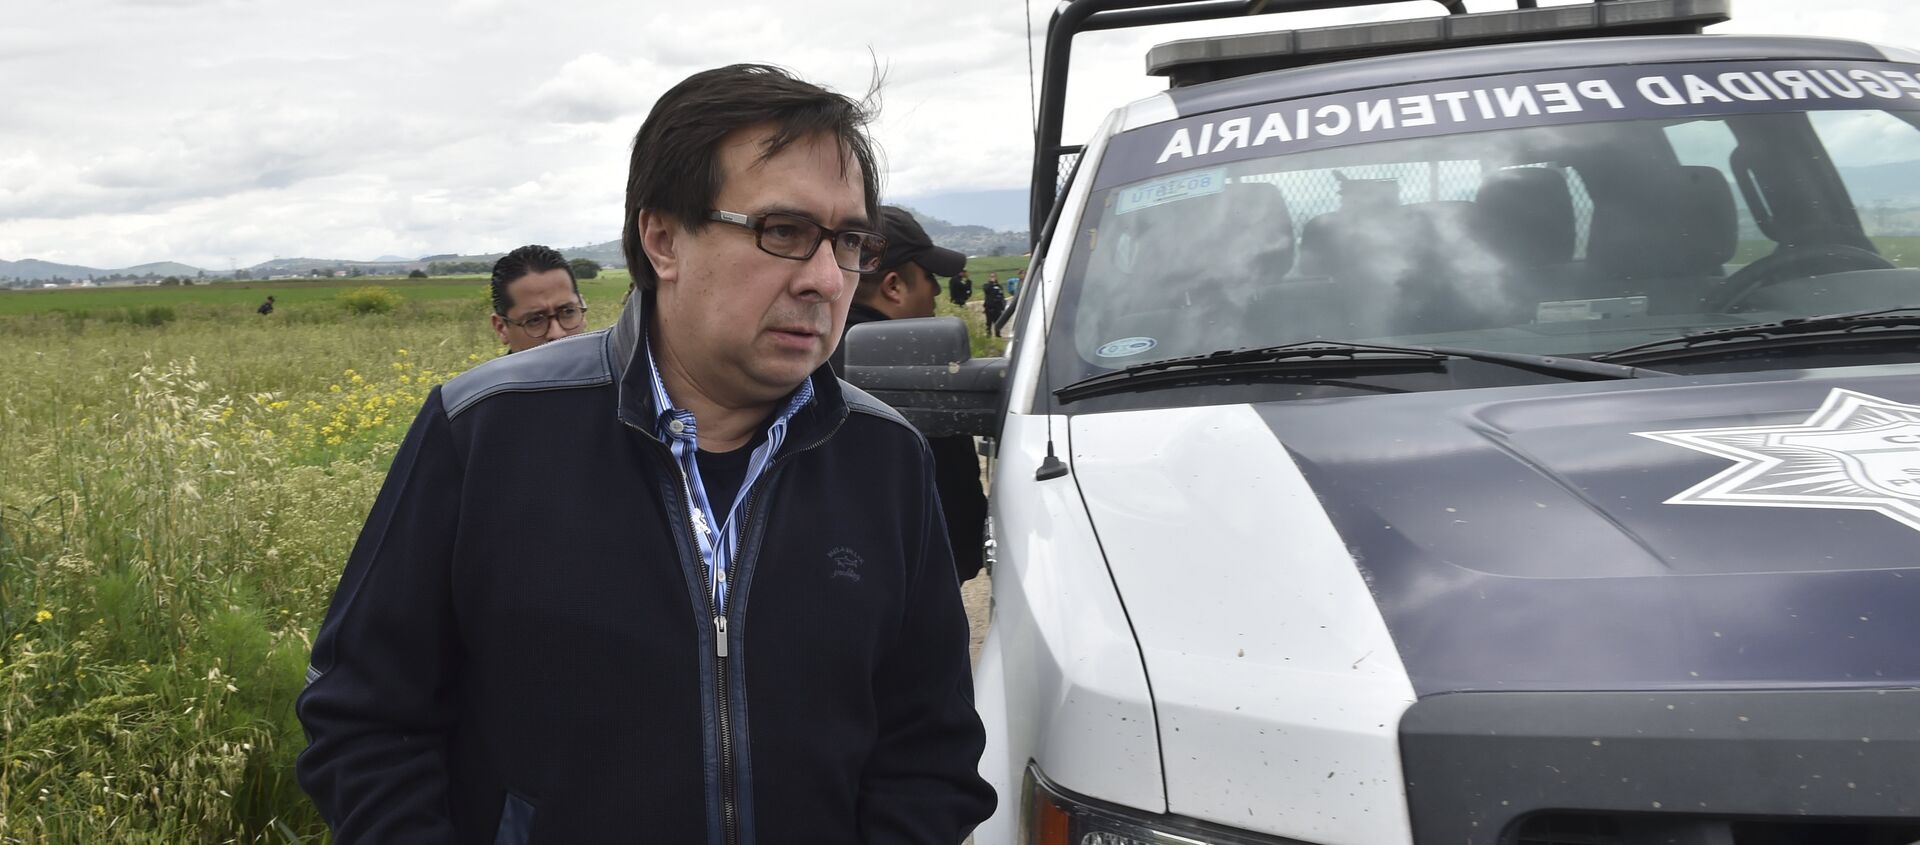 The director of the Criminal Investigation Agency, Tomas Zeron, arrives at the house at the end of the tunnel through which Mexican drug lord Joaquin El Chapo Guzman could have escaped from the Altiplano prison, in Almoloya de Juarez, Mexico, on July 12, 2015. - Sputnik Mundo, 1920, 14.01.2021